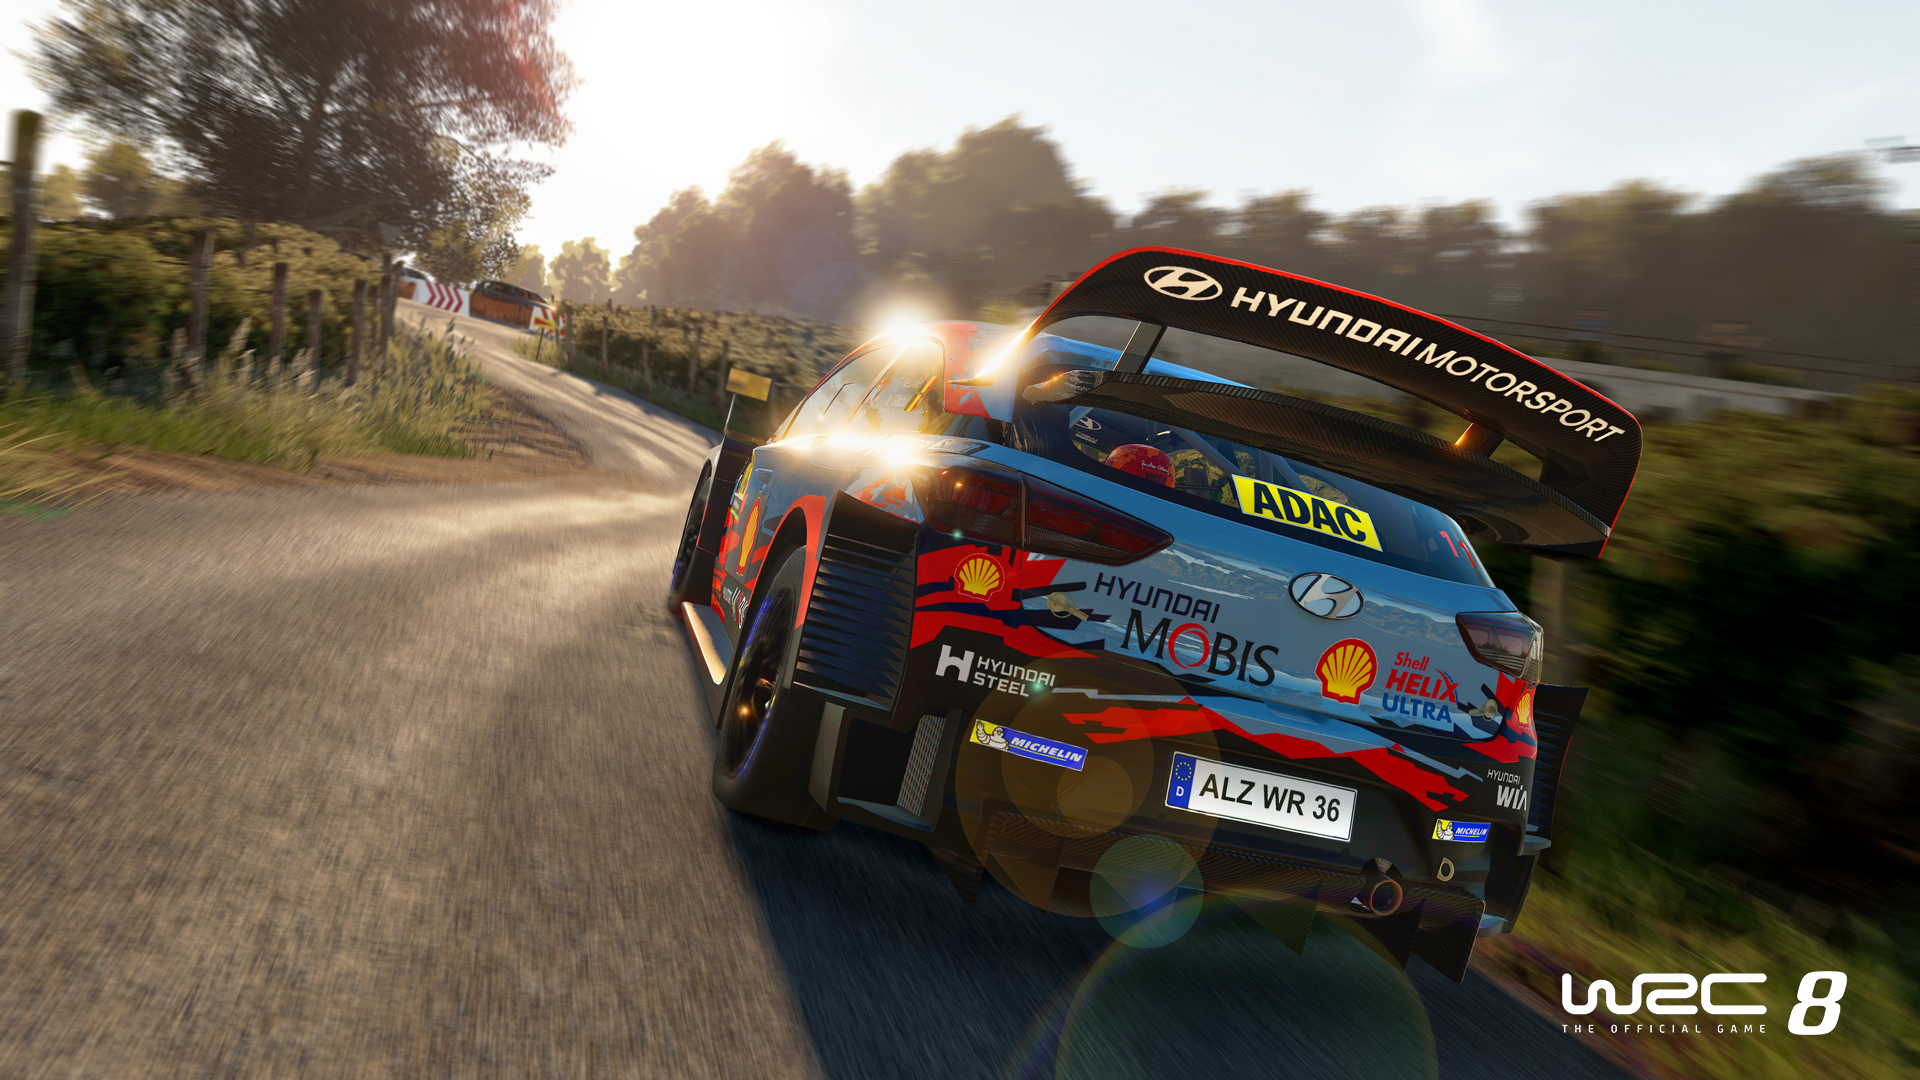 Media. WRC 8 official game of the FIA World Rally